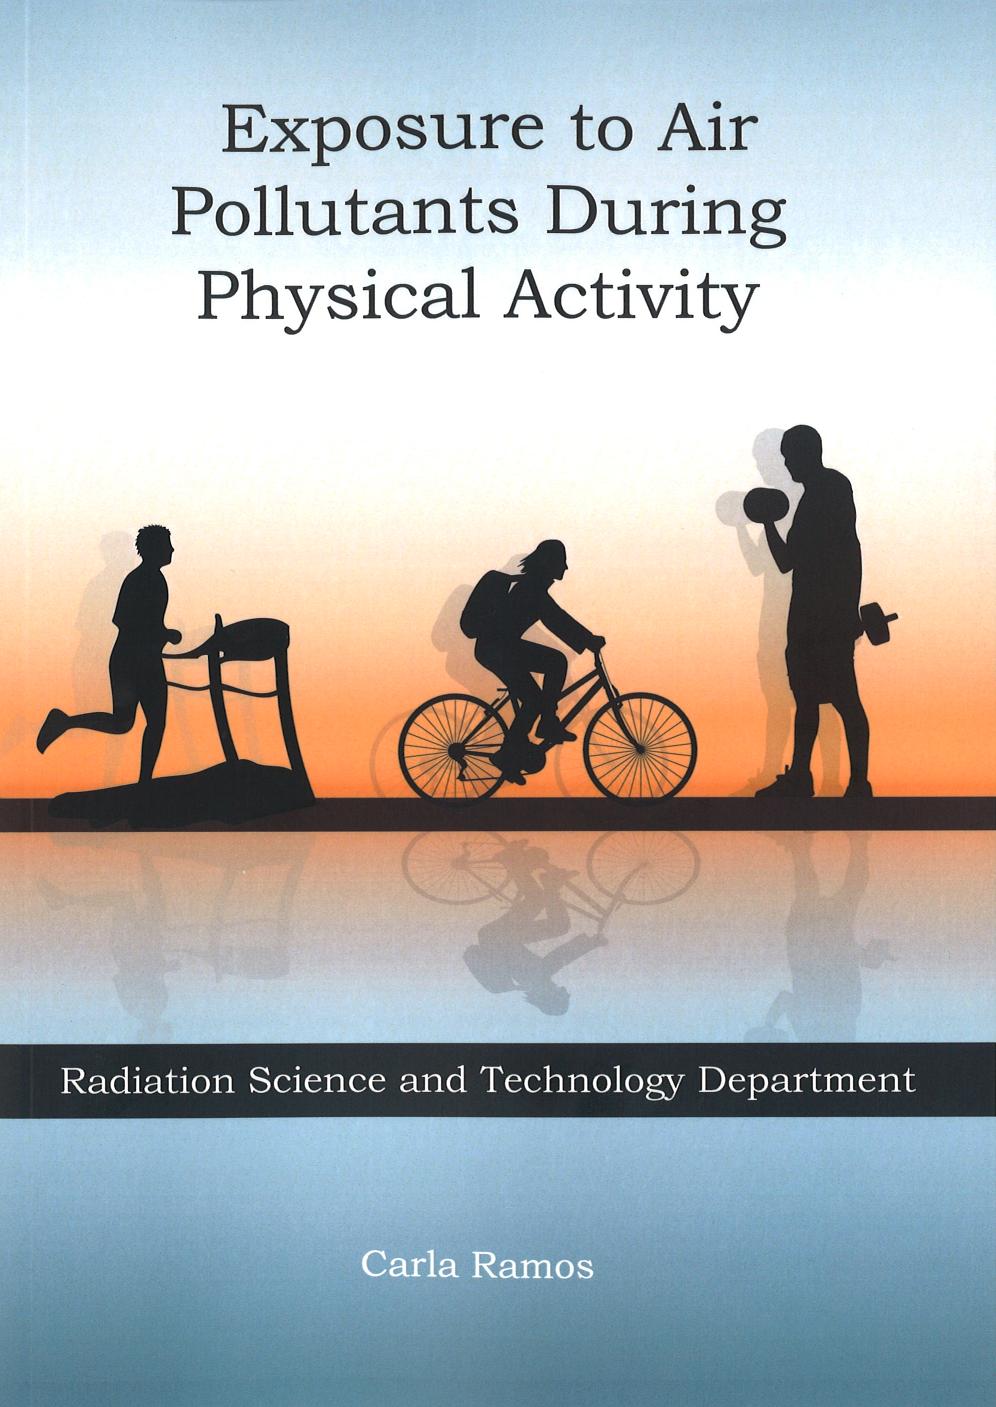 Exposure to Air Pollutants During Physical Activity